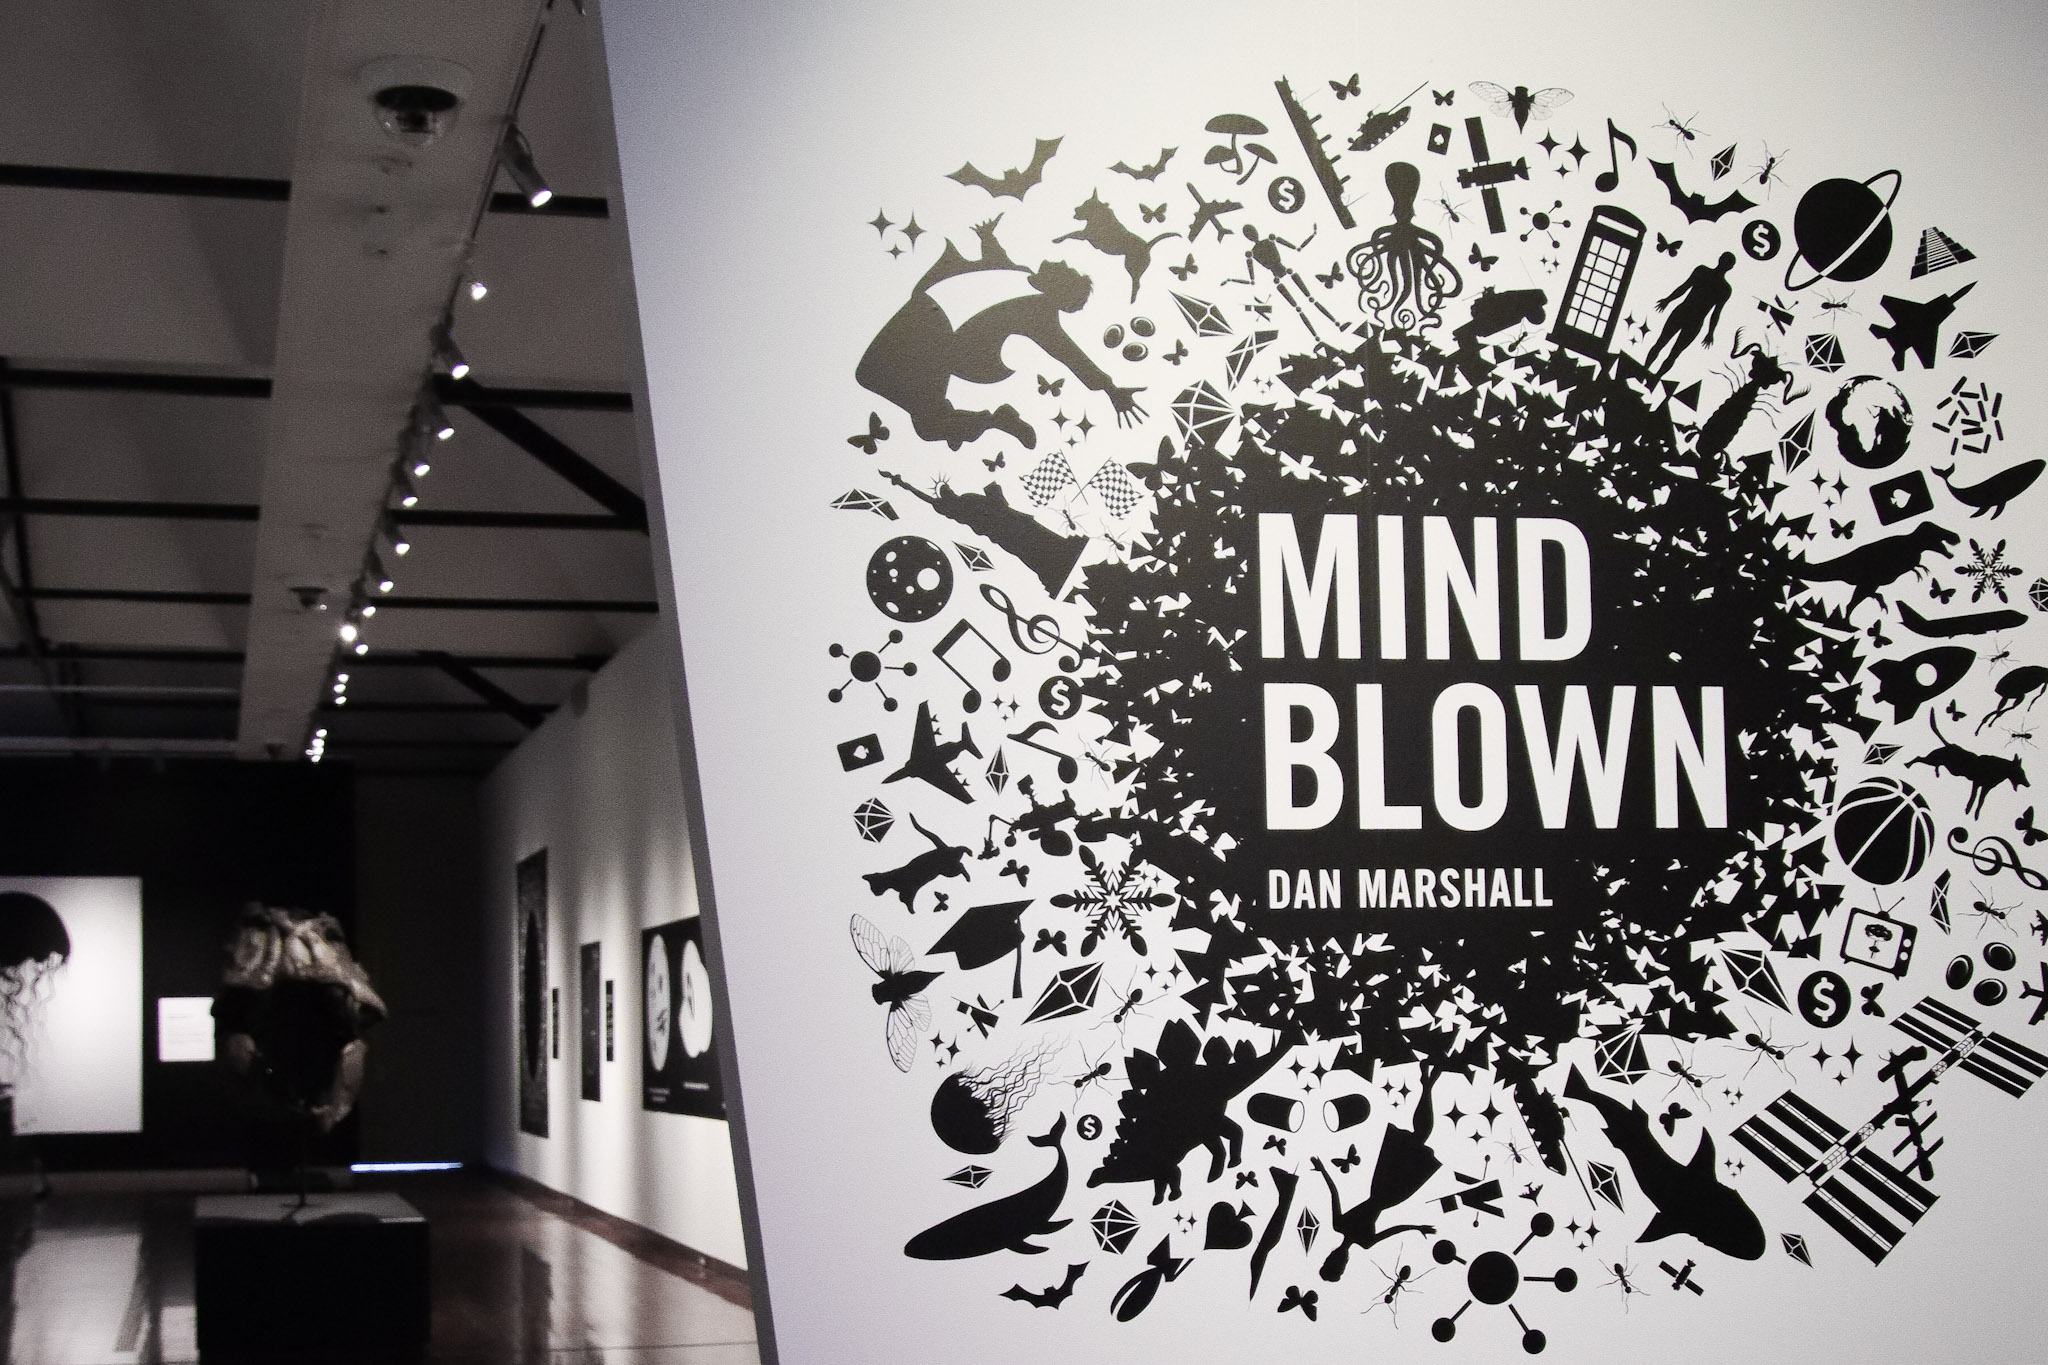 The entrance to the Mind Blown exhibition in the John Lees Atrium